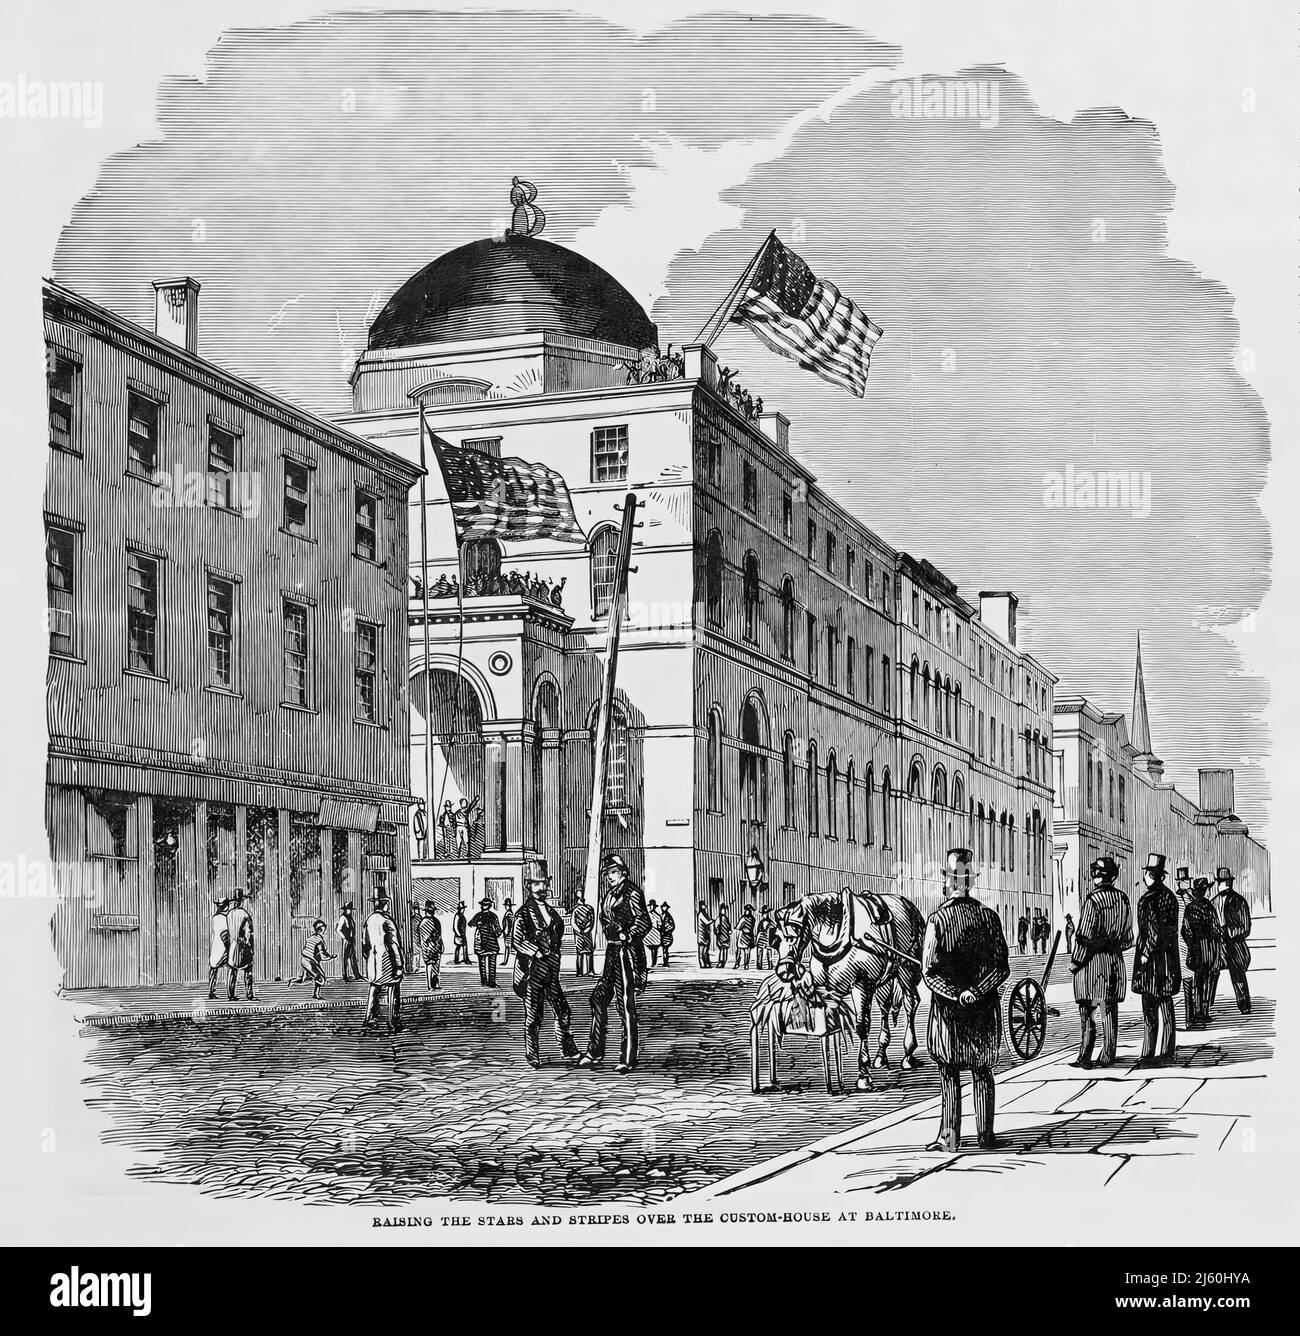 Raising the Stars and Stripes Over the Custom-House at Baltimore, Maryland, 1861, in the American Civil War. 19th century illustration Stock Photo